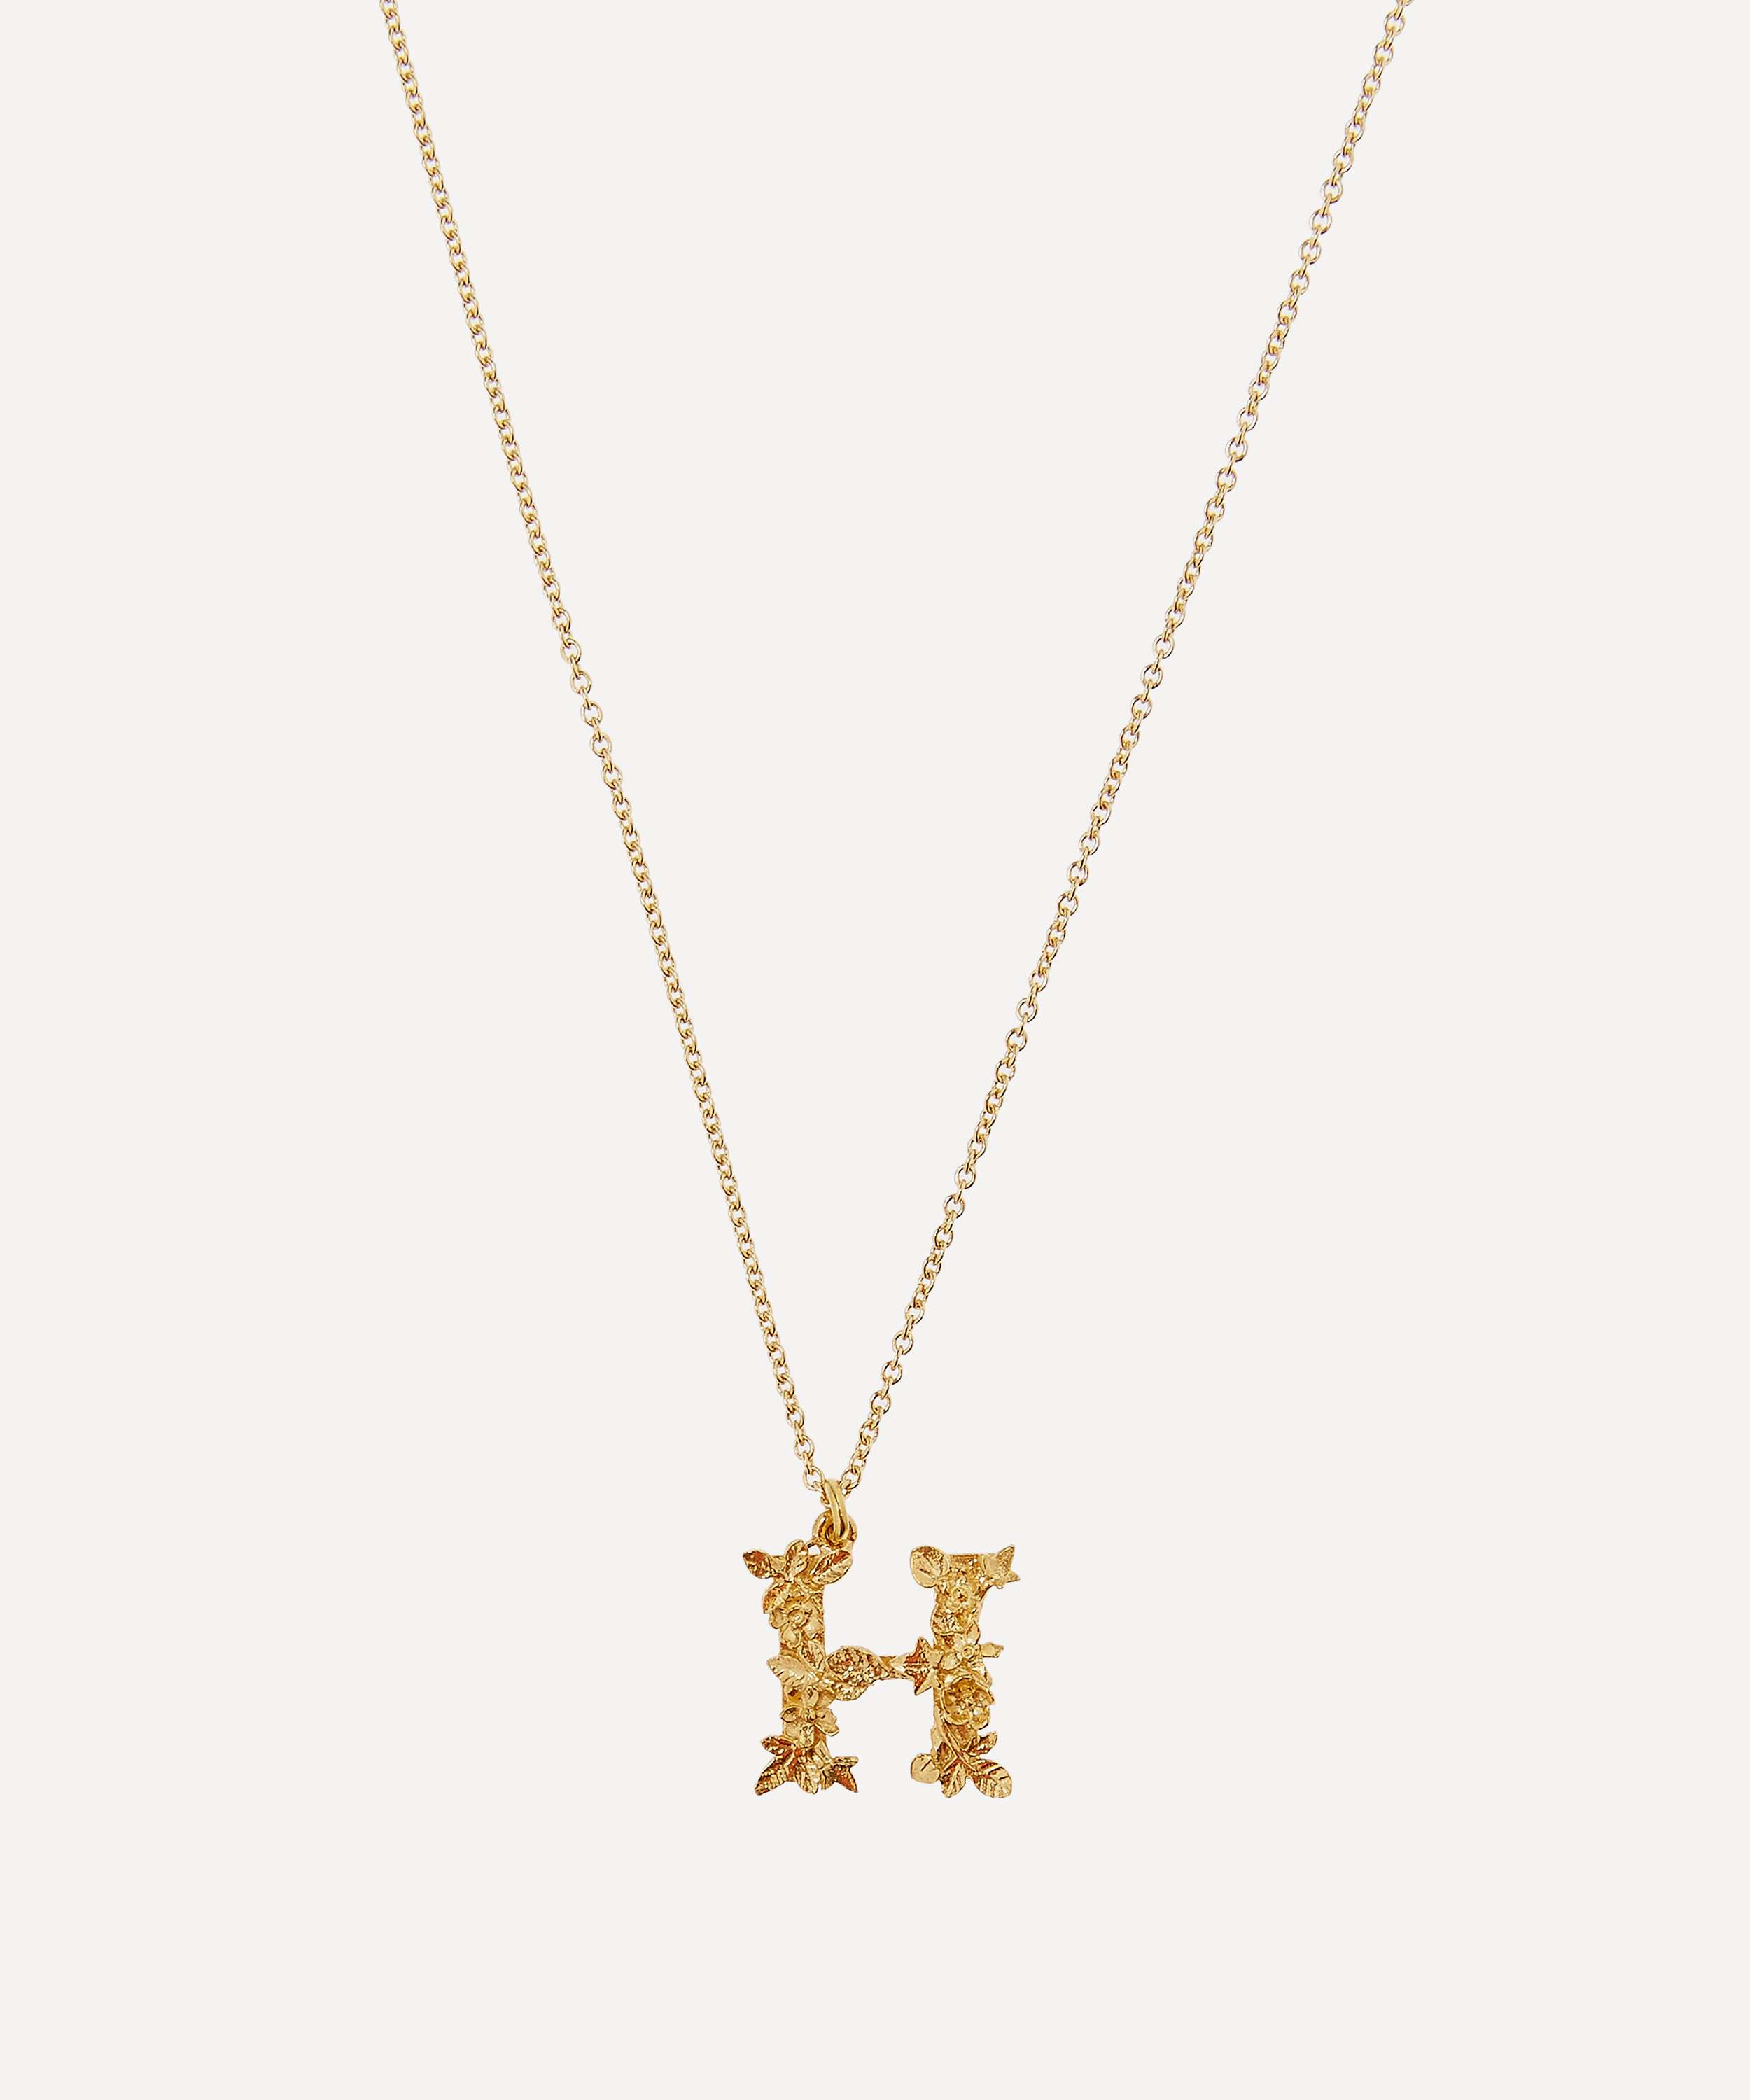 Personalised Jewellery Ideas Just for You | Liberty